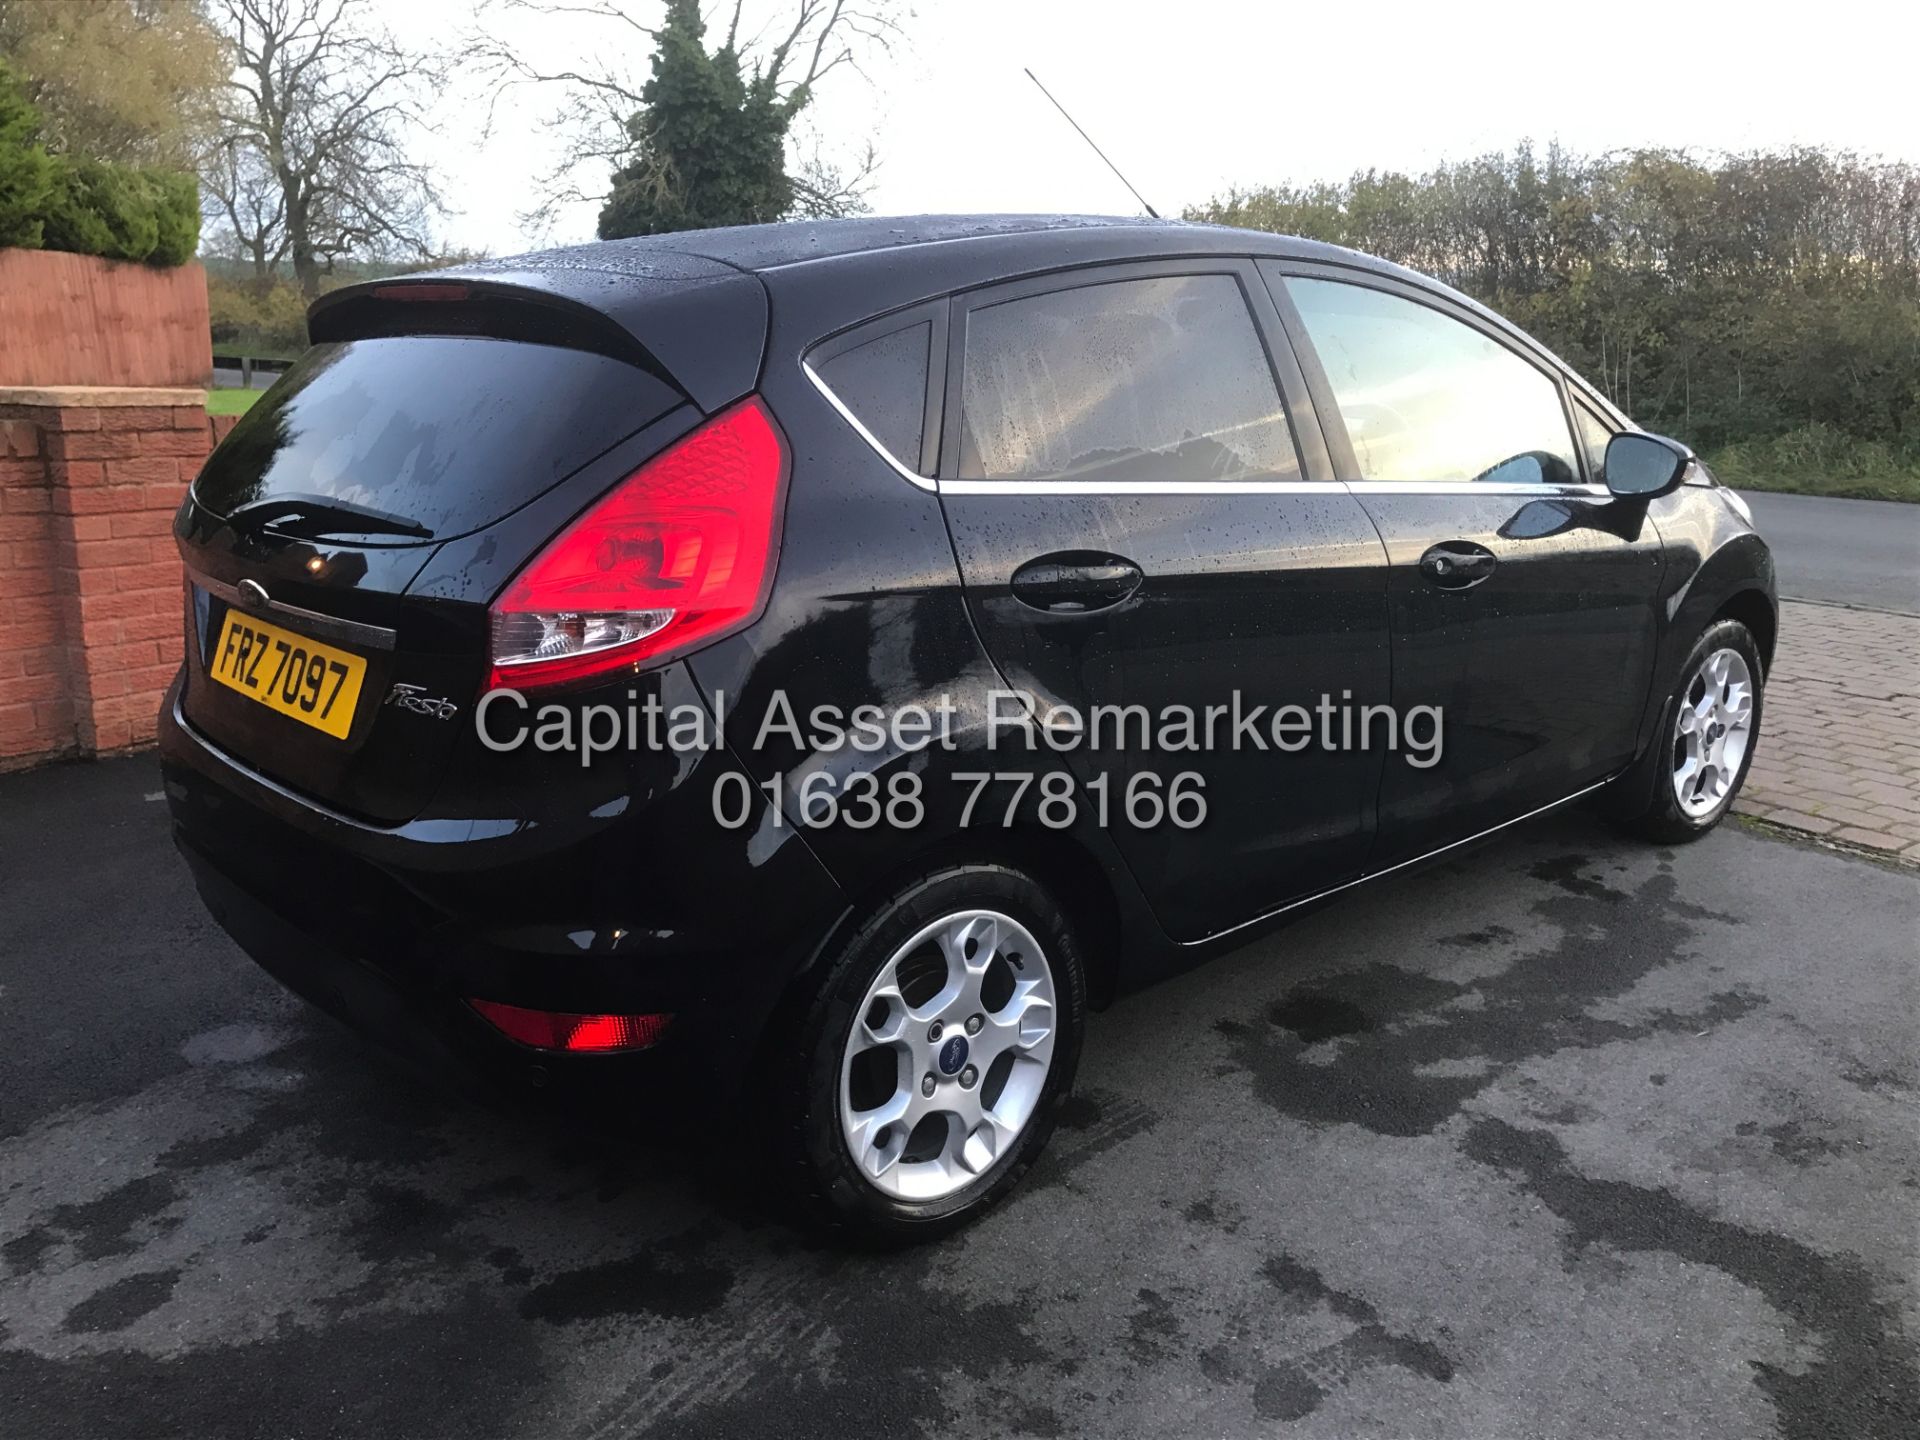 (ON SALE) FORD FIESTA 1.4TDCI "ZETEC" 5DOOR (2012 YEAR) AIR CON-ELEC PACK- RED/BLACK INTERIOR - Image 7 of 22